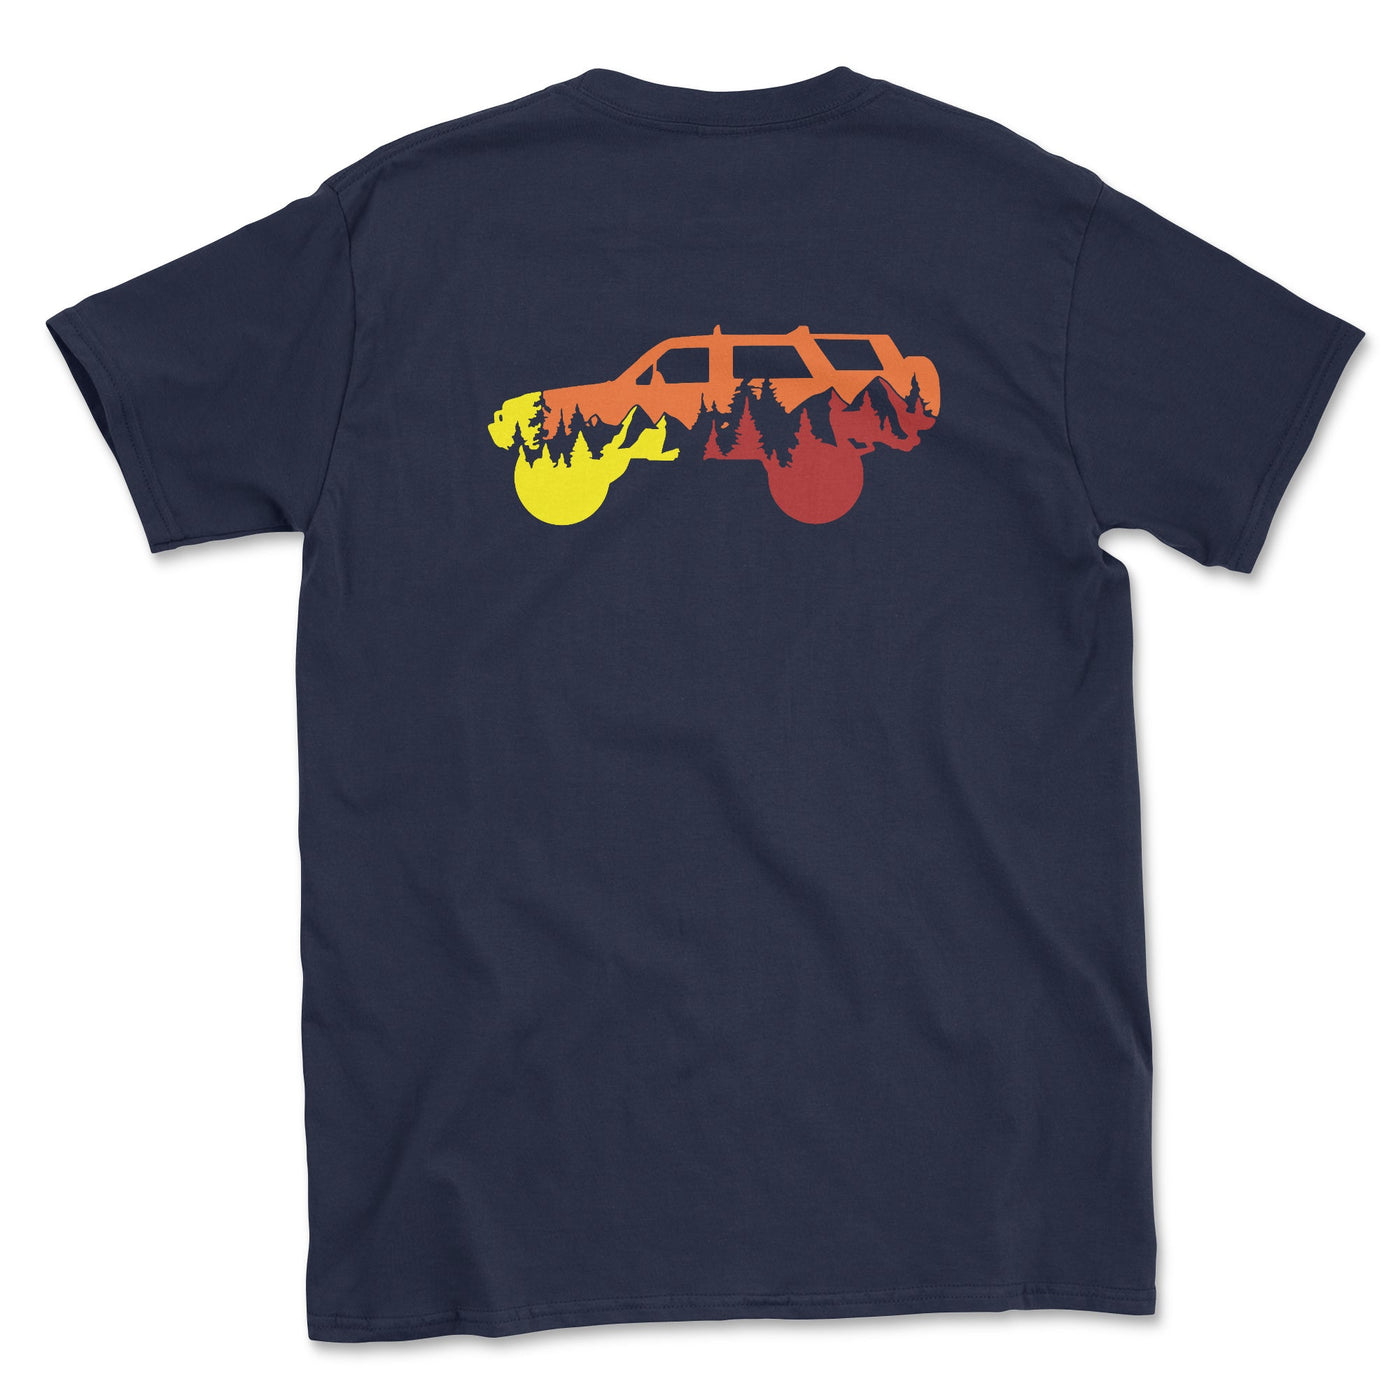 Retro The Places You Will Go Shirt - Goats Trail Off-Road Apparel Company